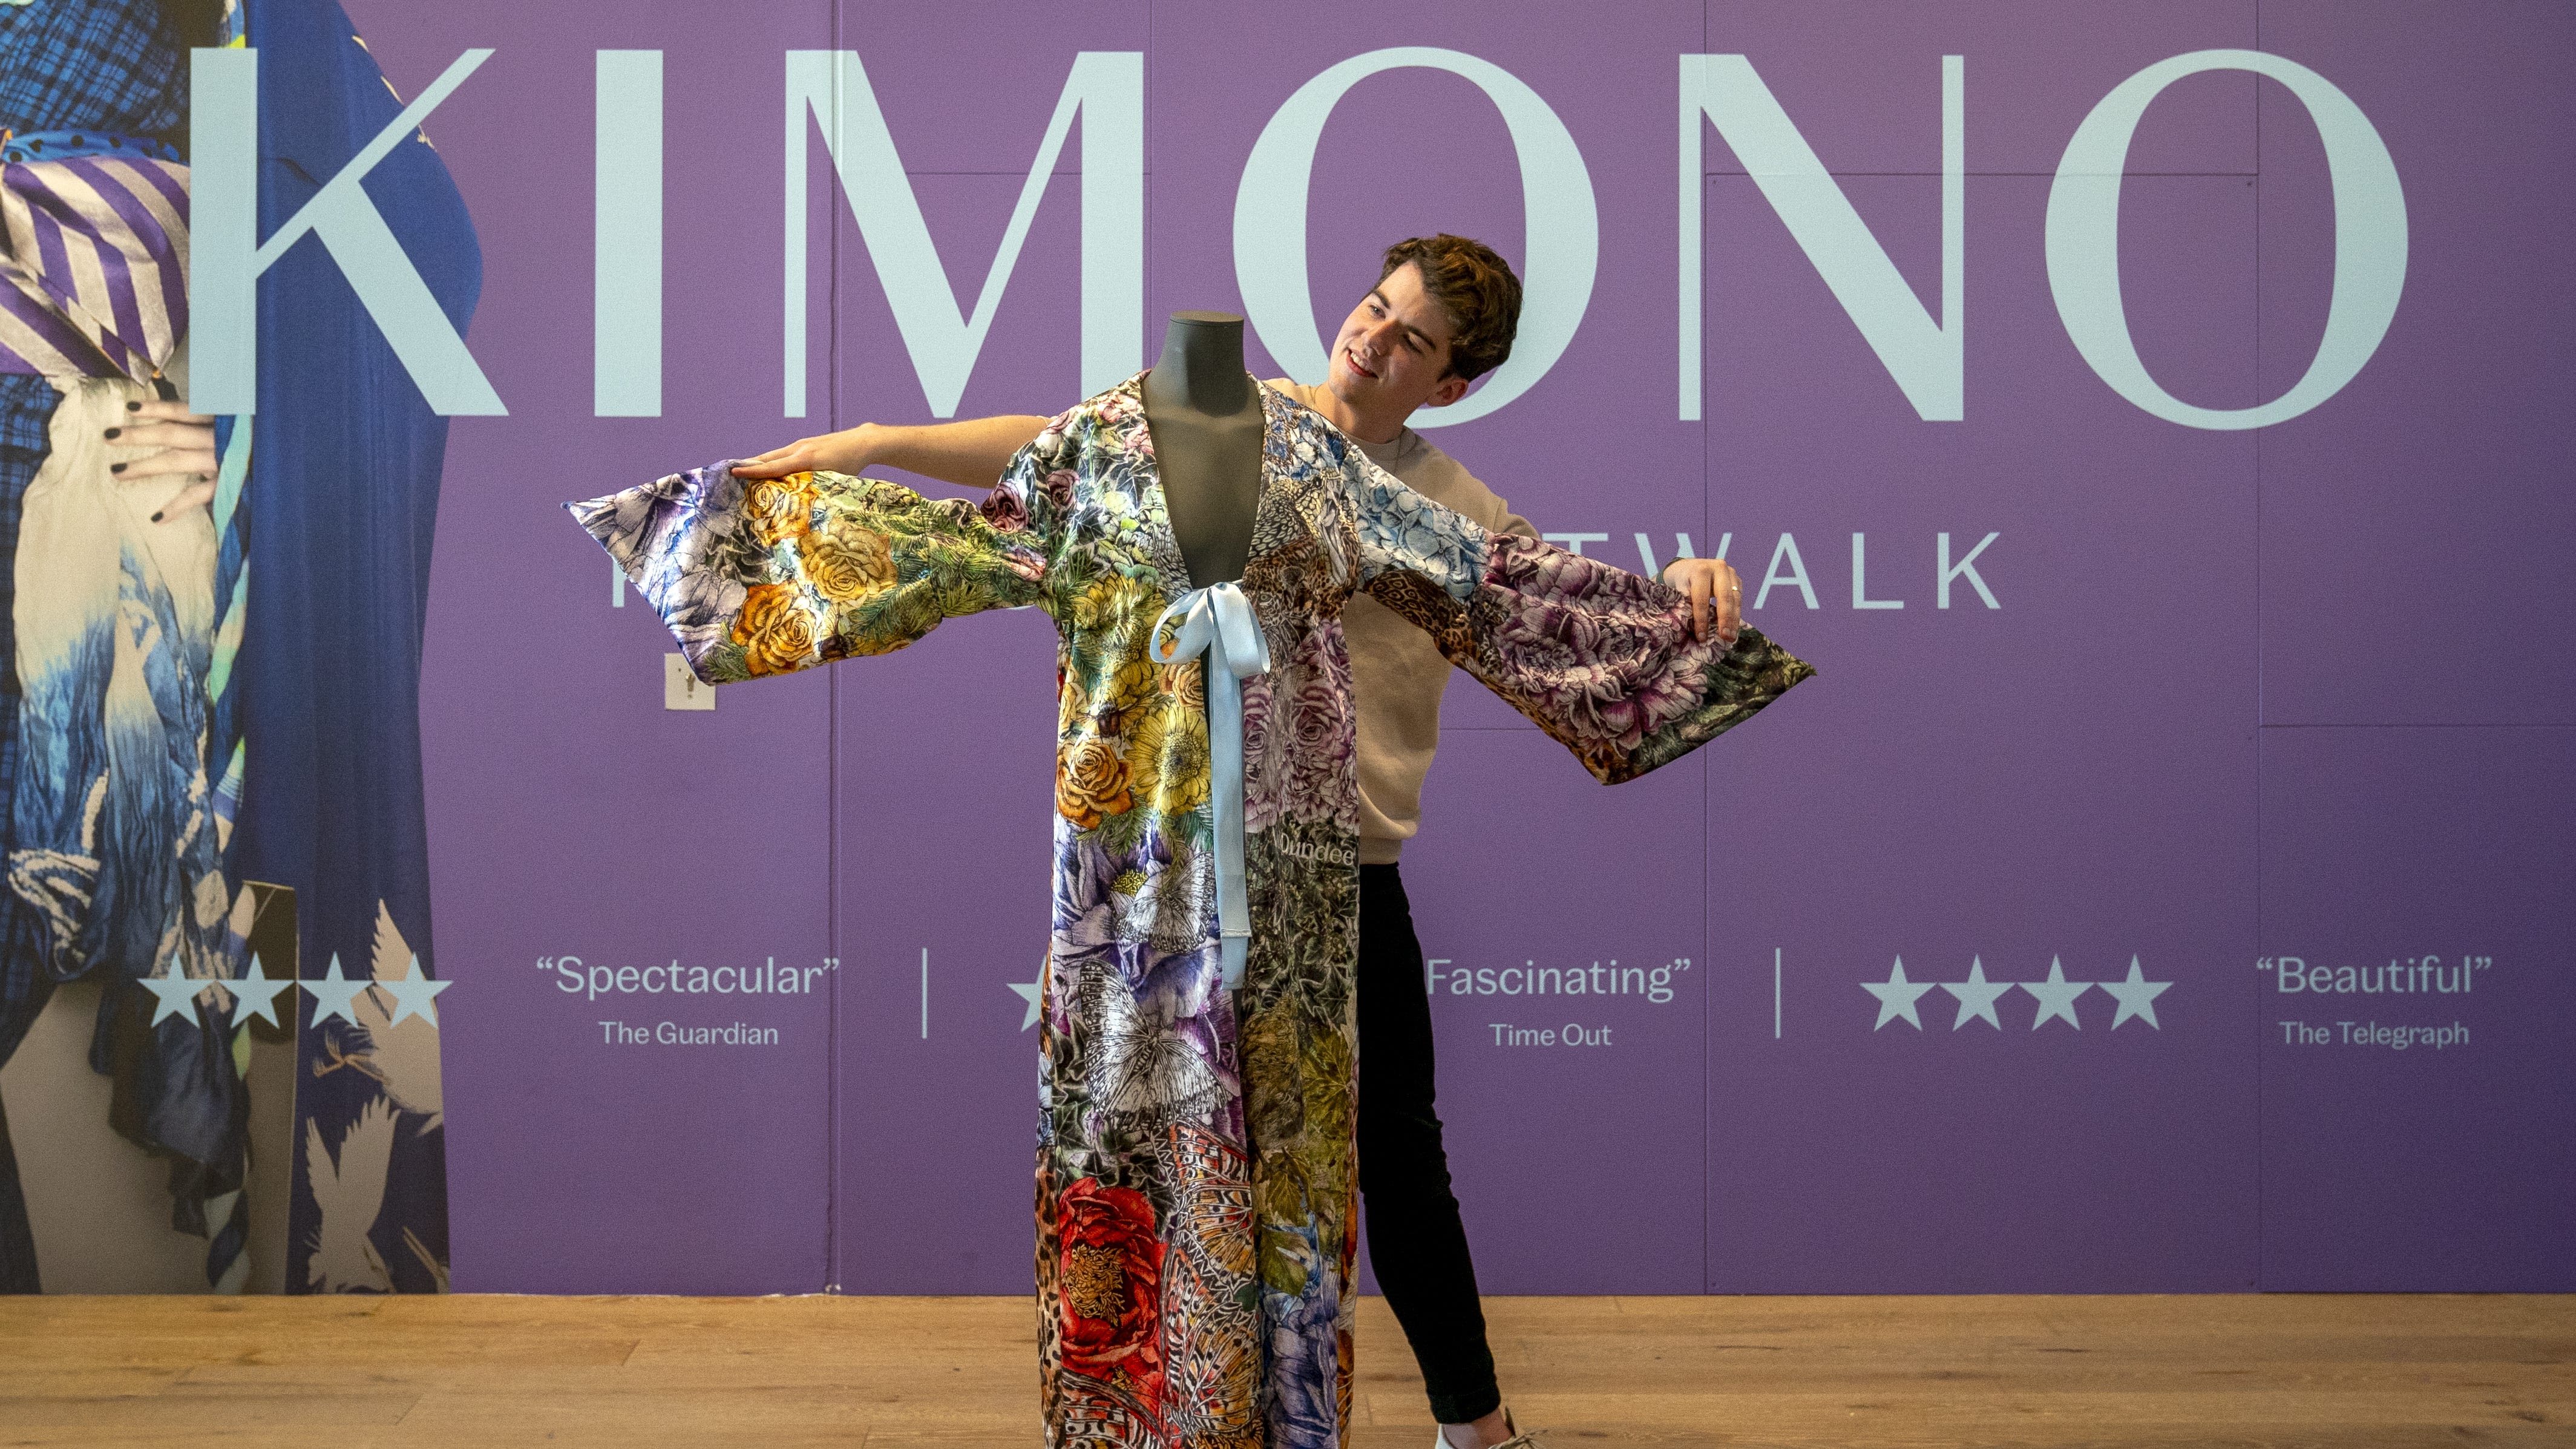 Kimono inspired by Taylor Swift to go on display ahead of her UK shows